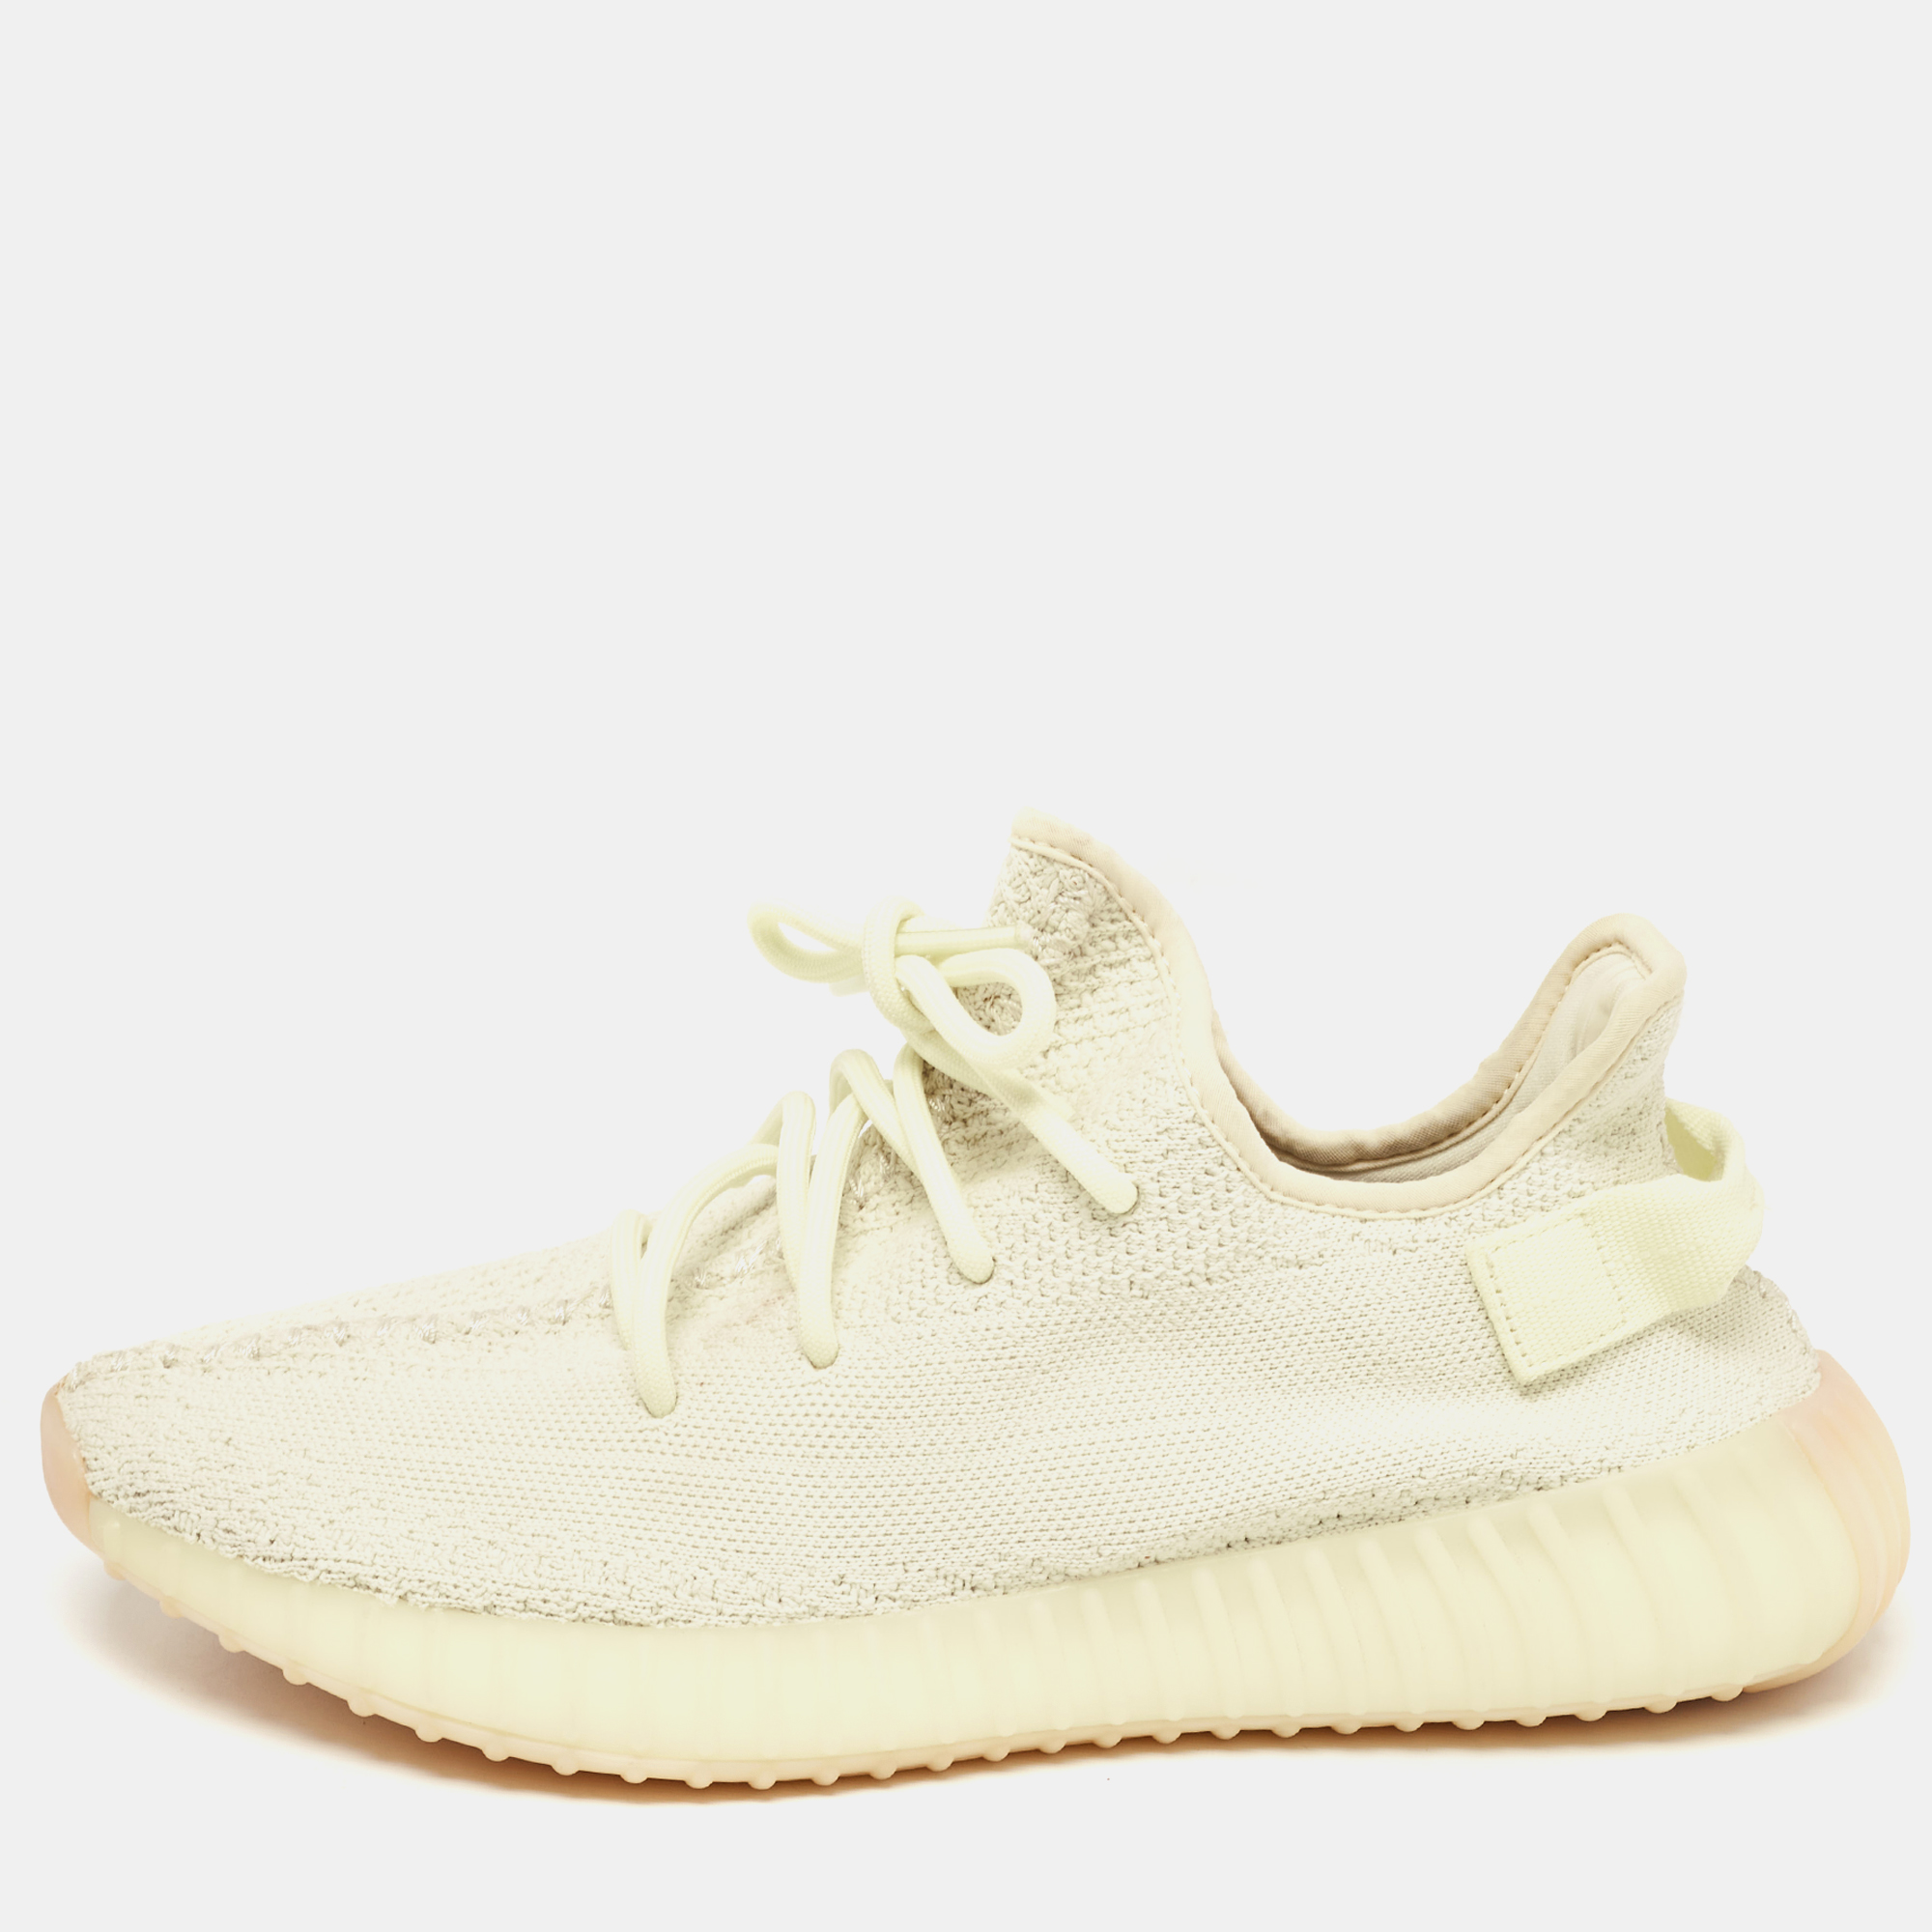 Yeezy X Adidas Light Yellow Knit Fabric Boost 350 V2 Butter Sneakers Size 42 2/3